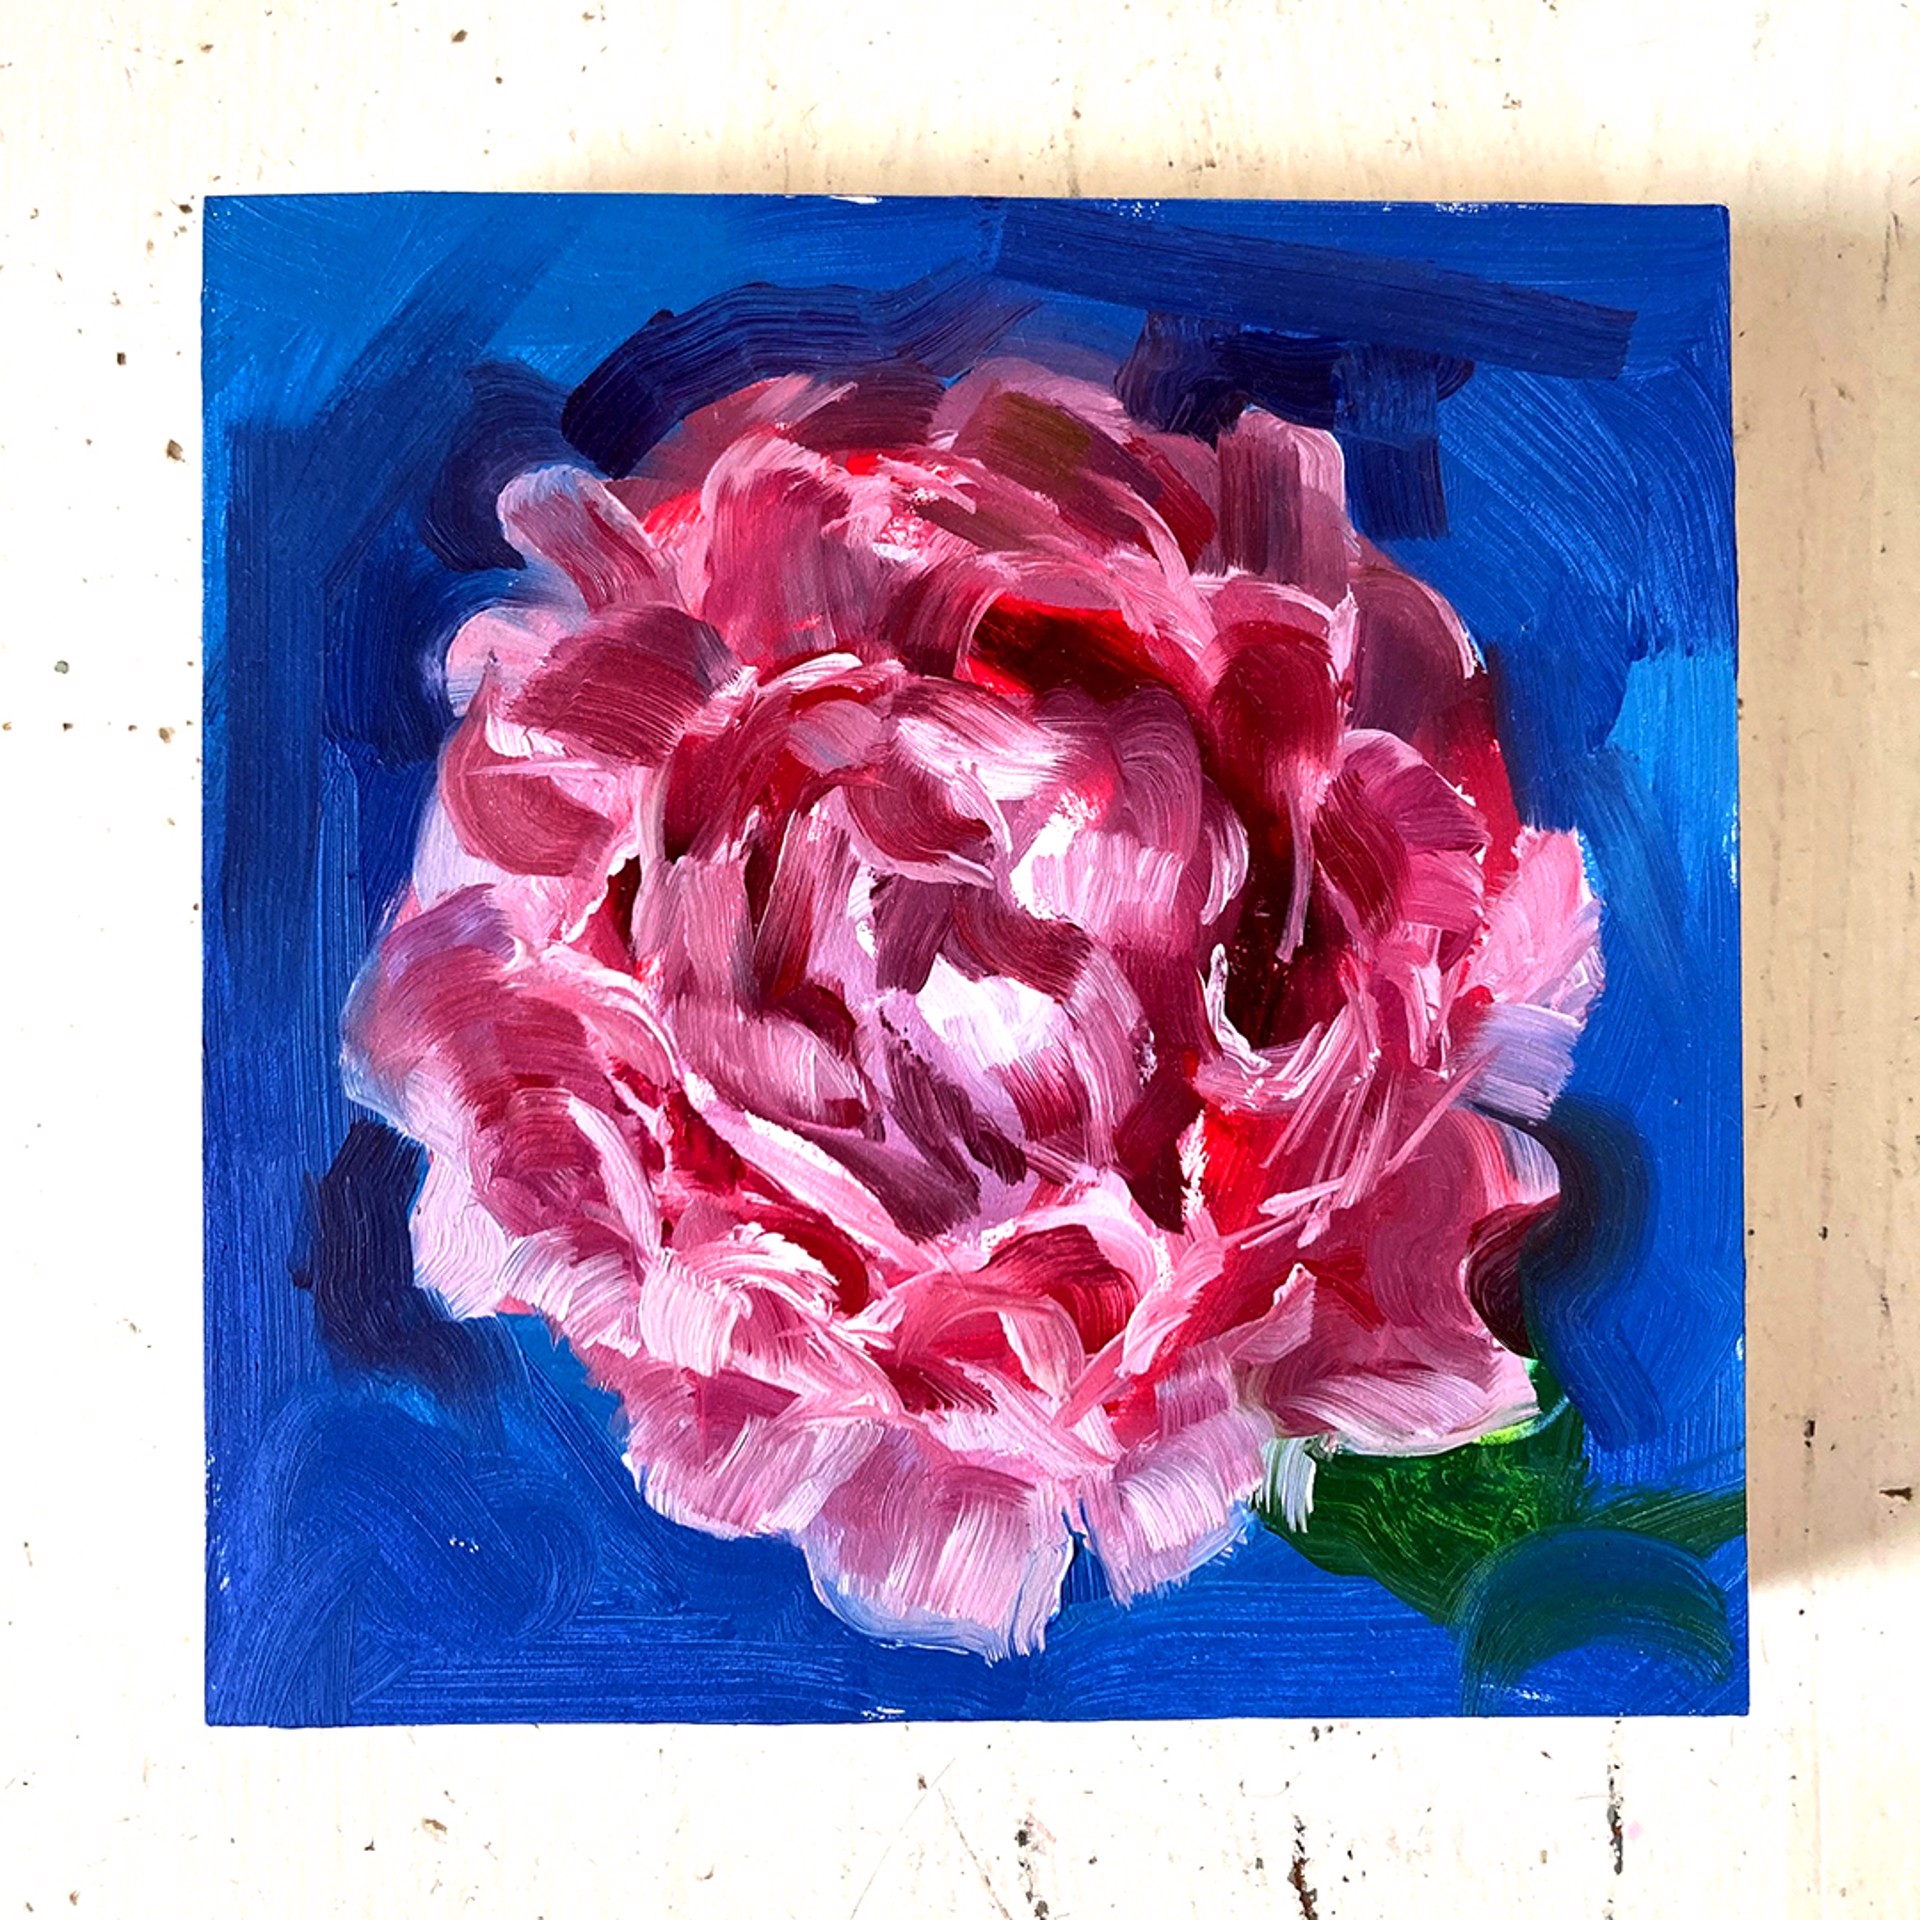 Peony Project #7 by Amy R. Peterson*